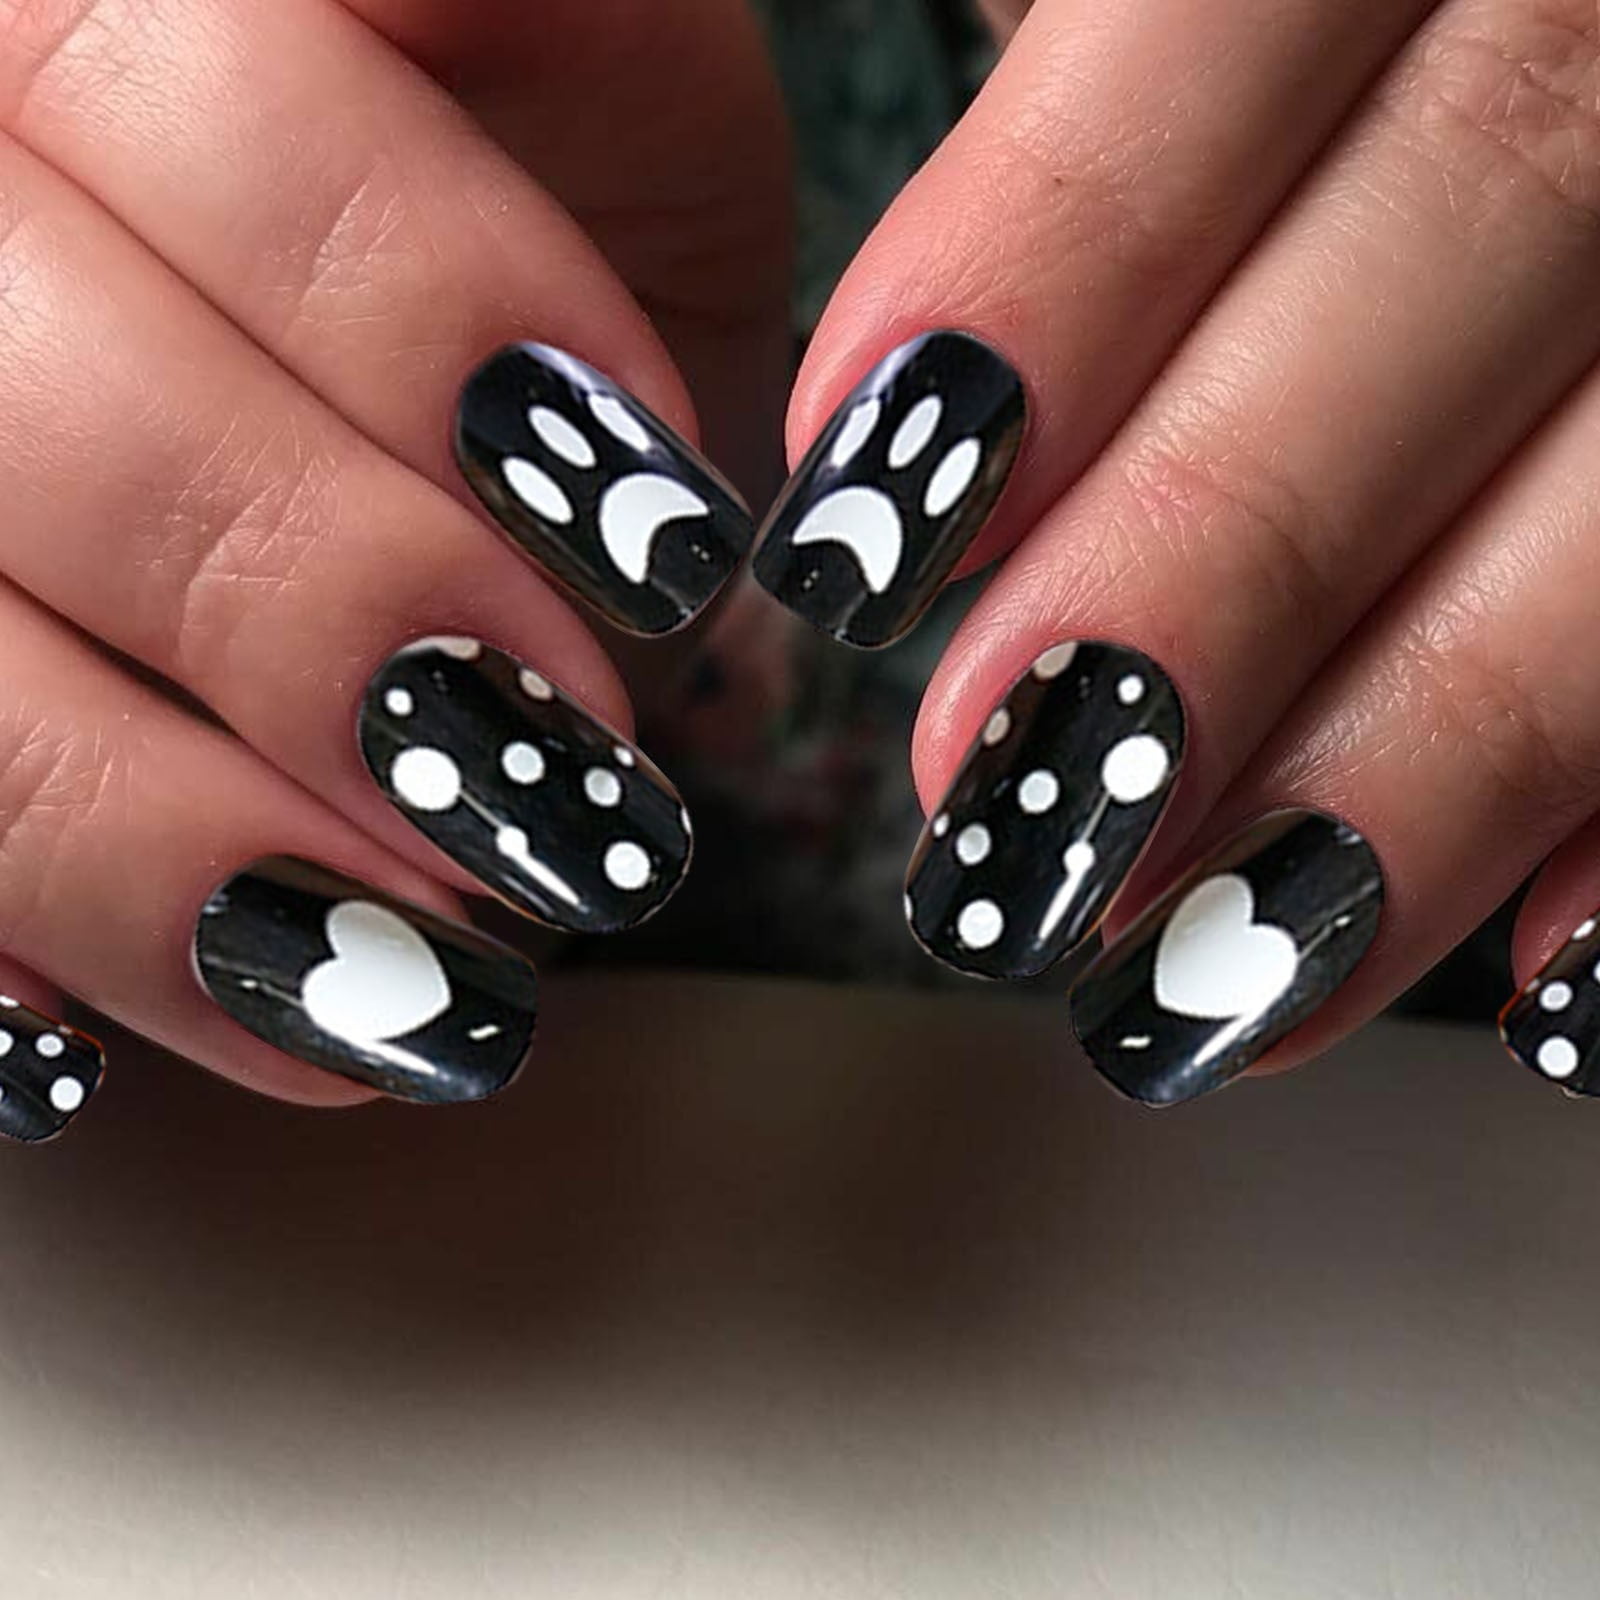 32 Magical Disney-Inspired Nail Designs to Wear in 2022 - Uptown Girl